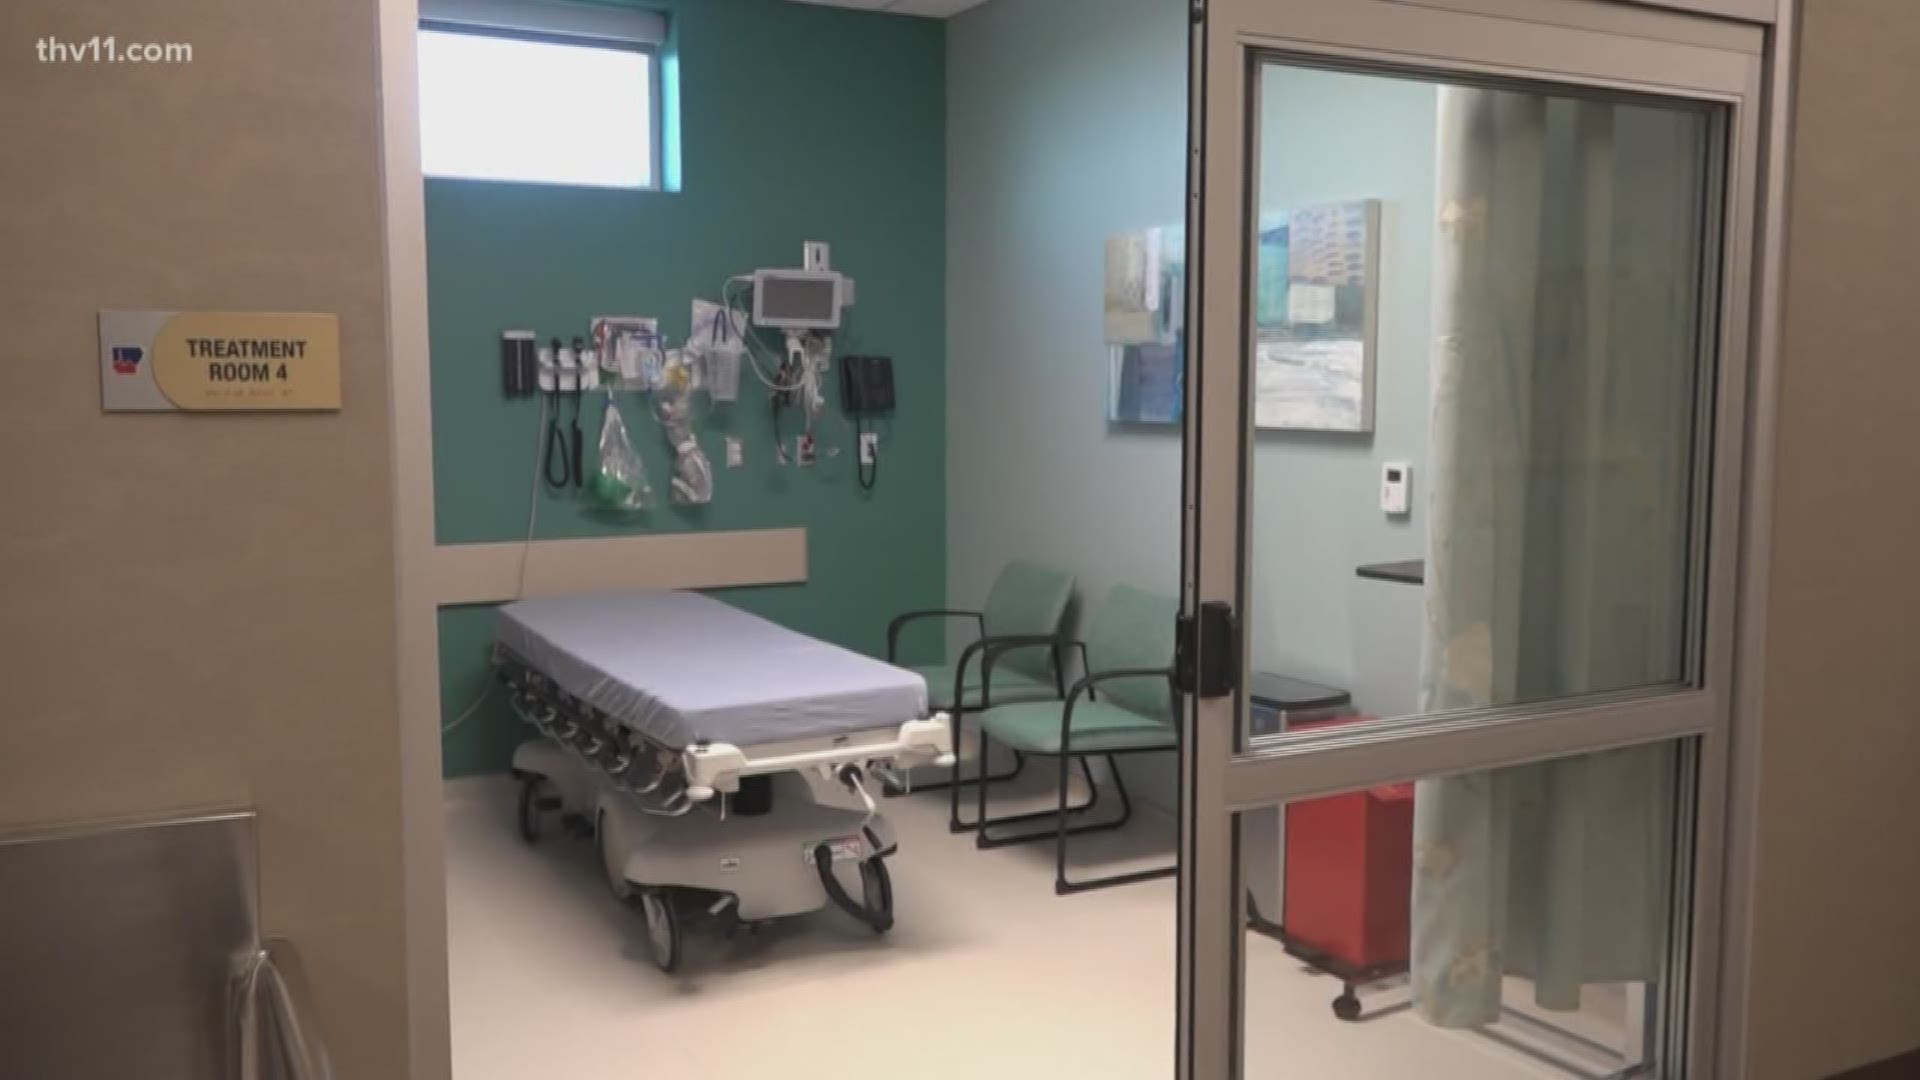 For the first time, Cabot has access to a local hospital. It's filling the need for people all over the area and cutting down on emergency response times.